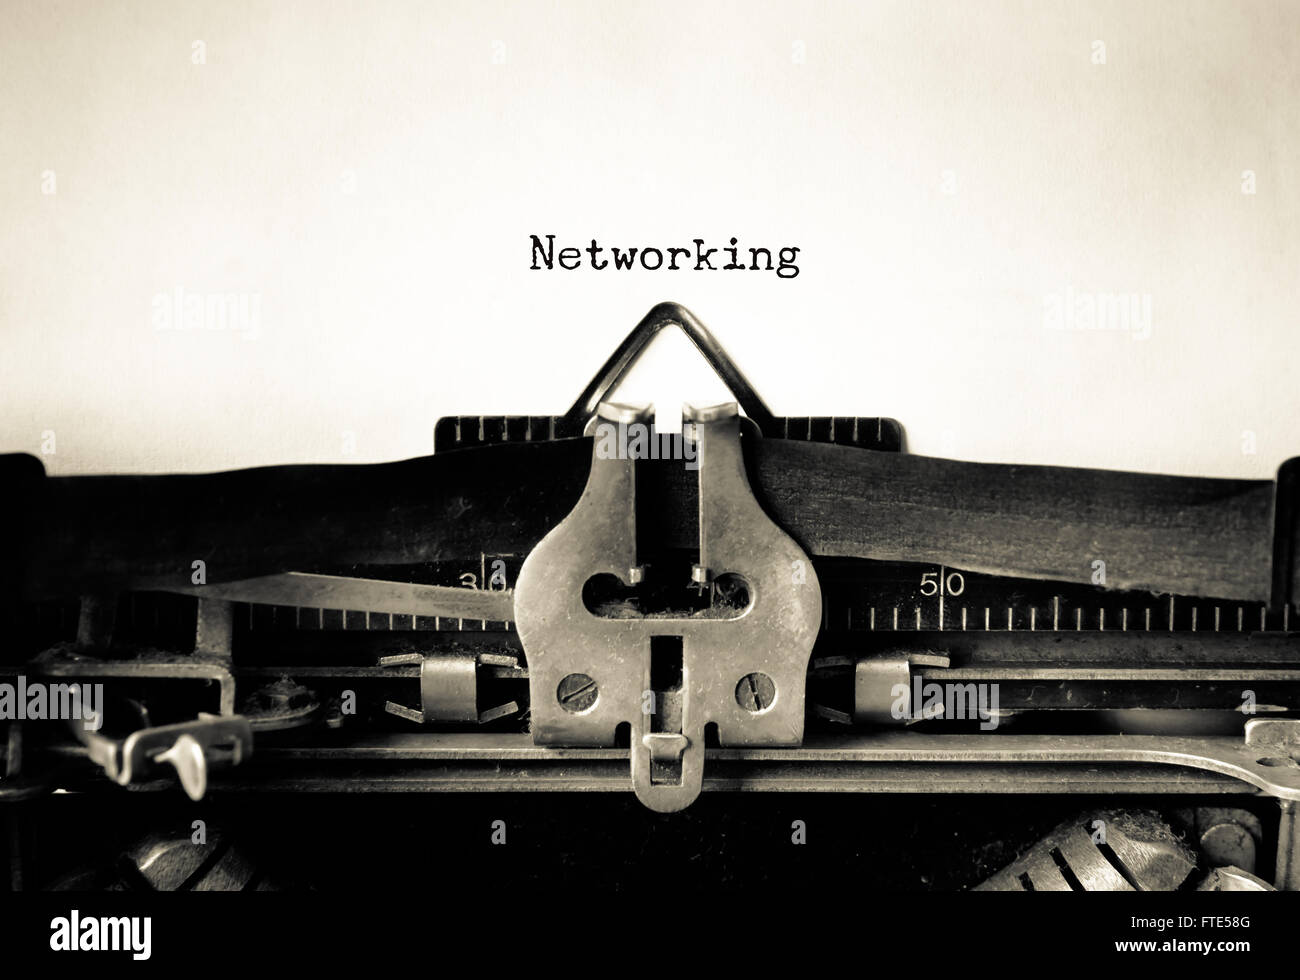 Networking word typed on a Vintage Typewriter Stock Photo